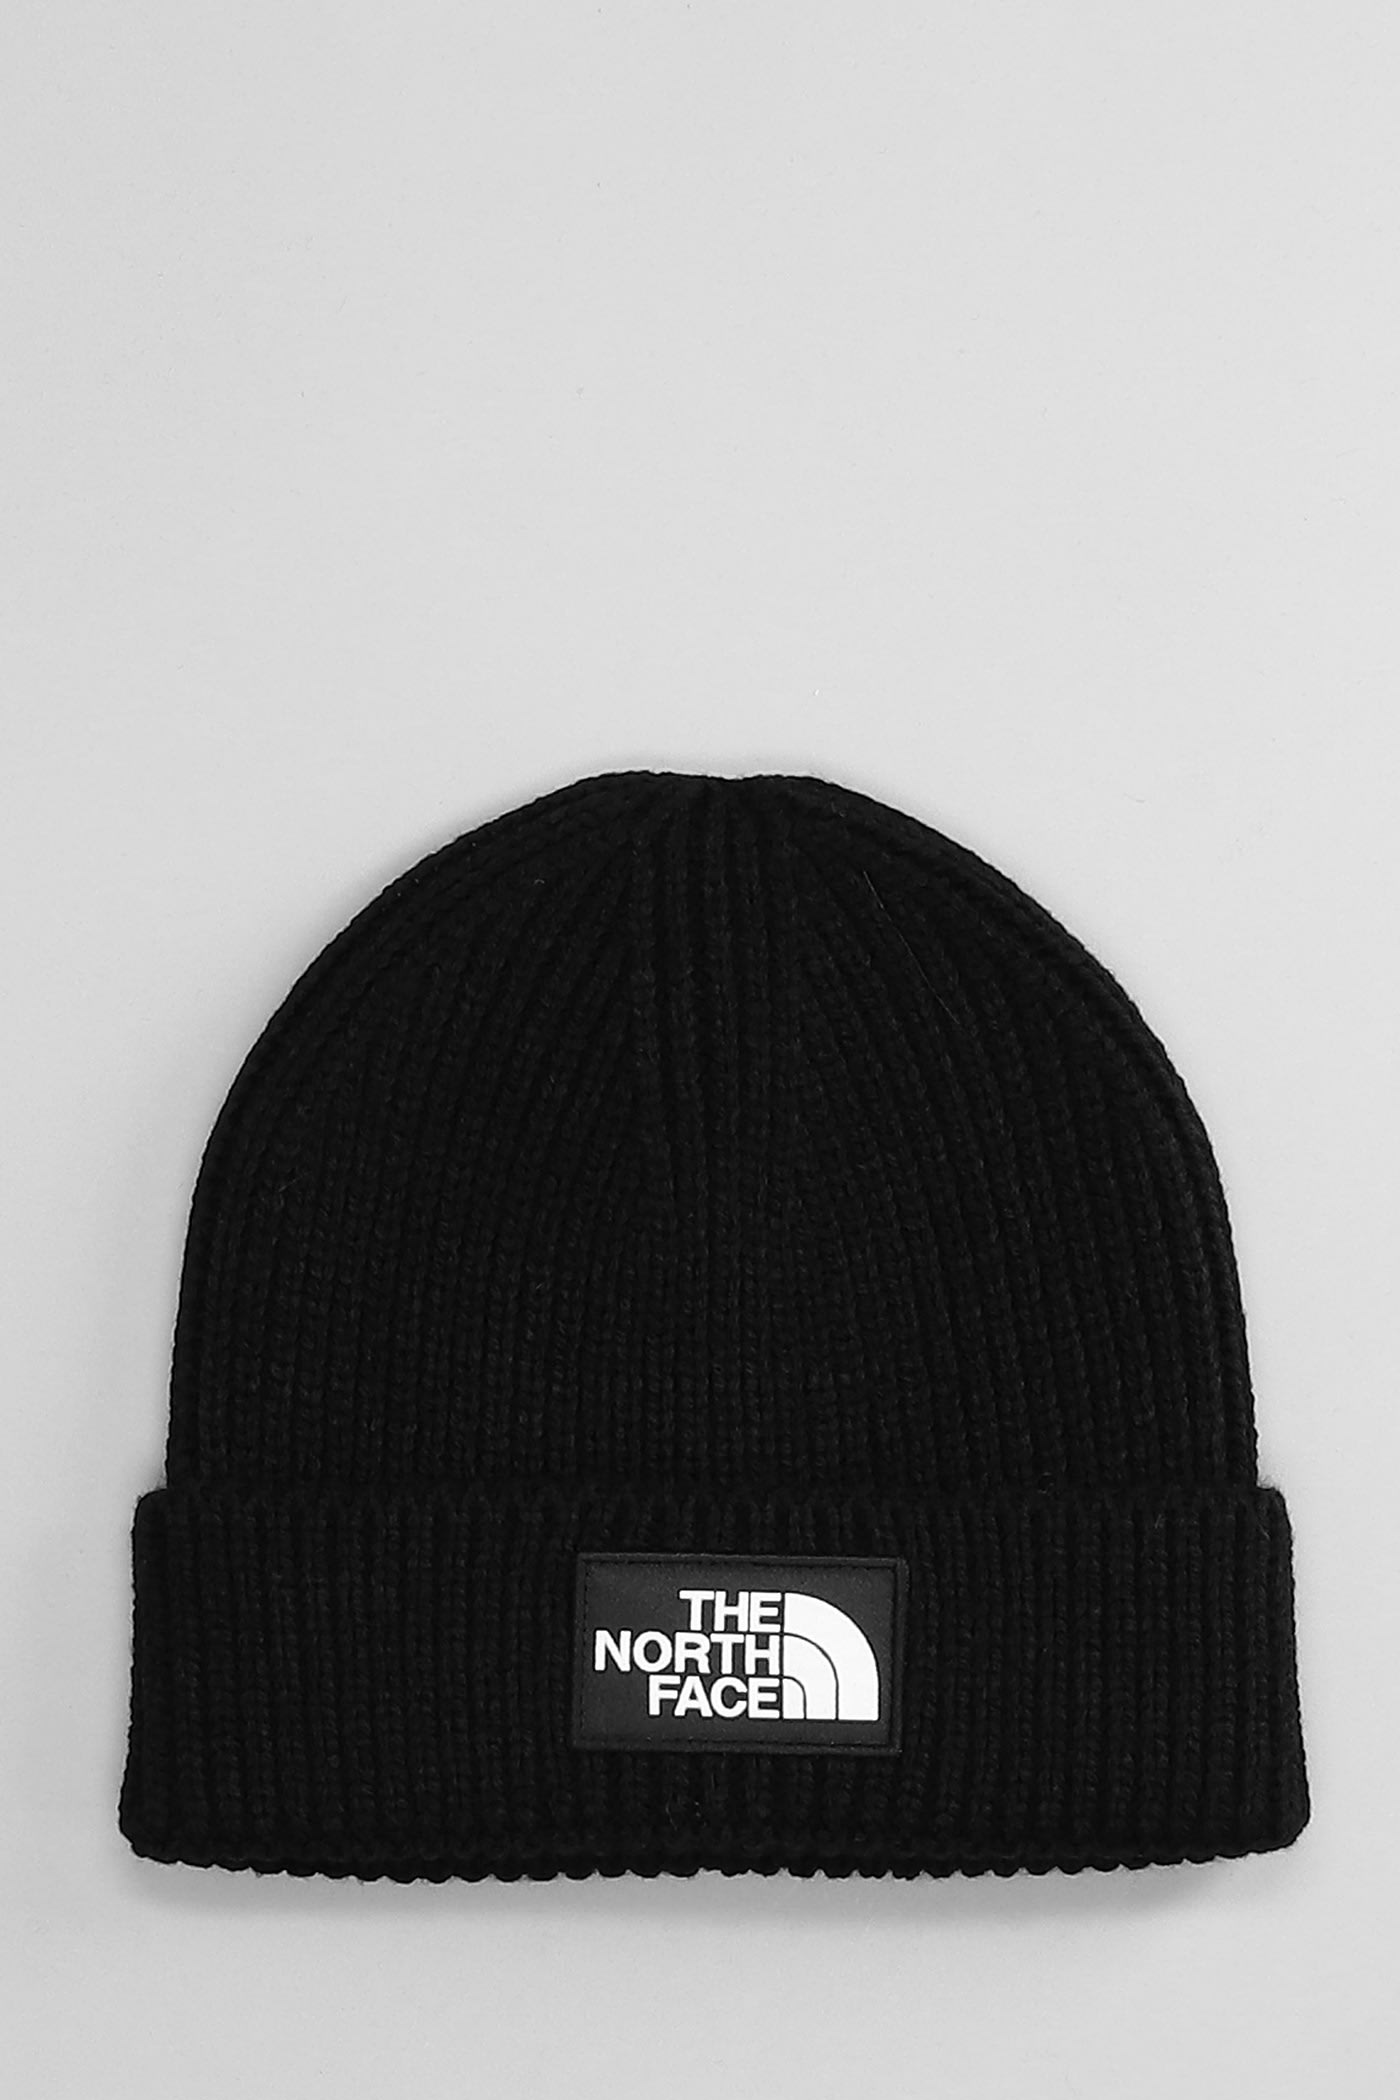 THE NORTH FACE HATS IN BLACK WOOL